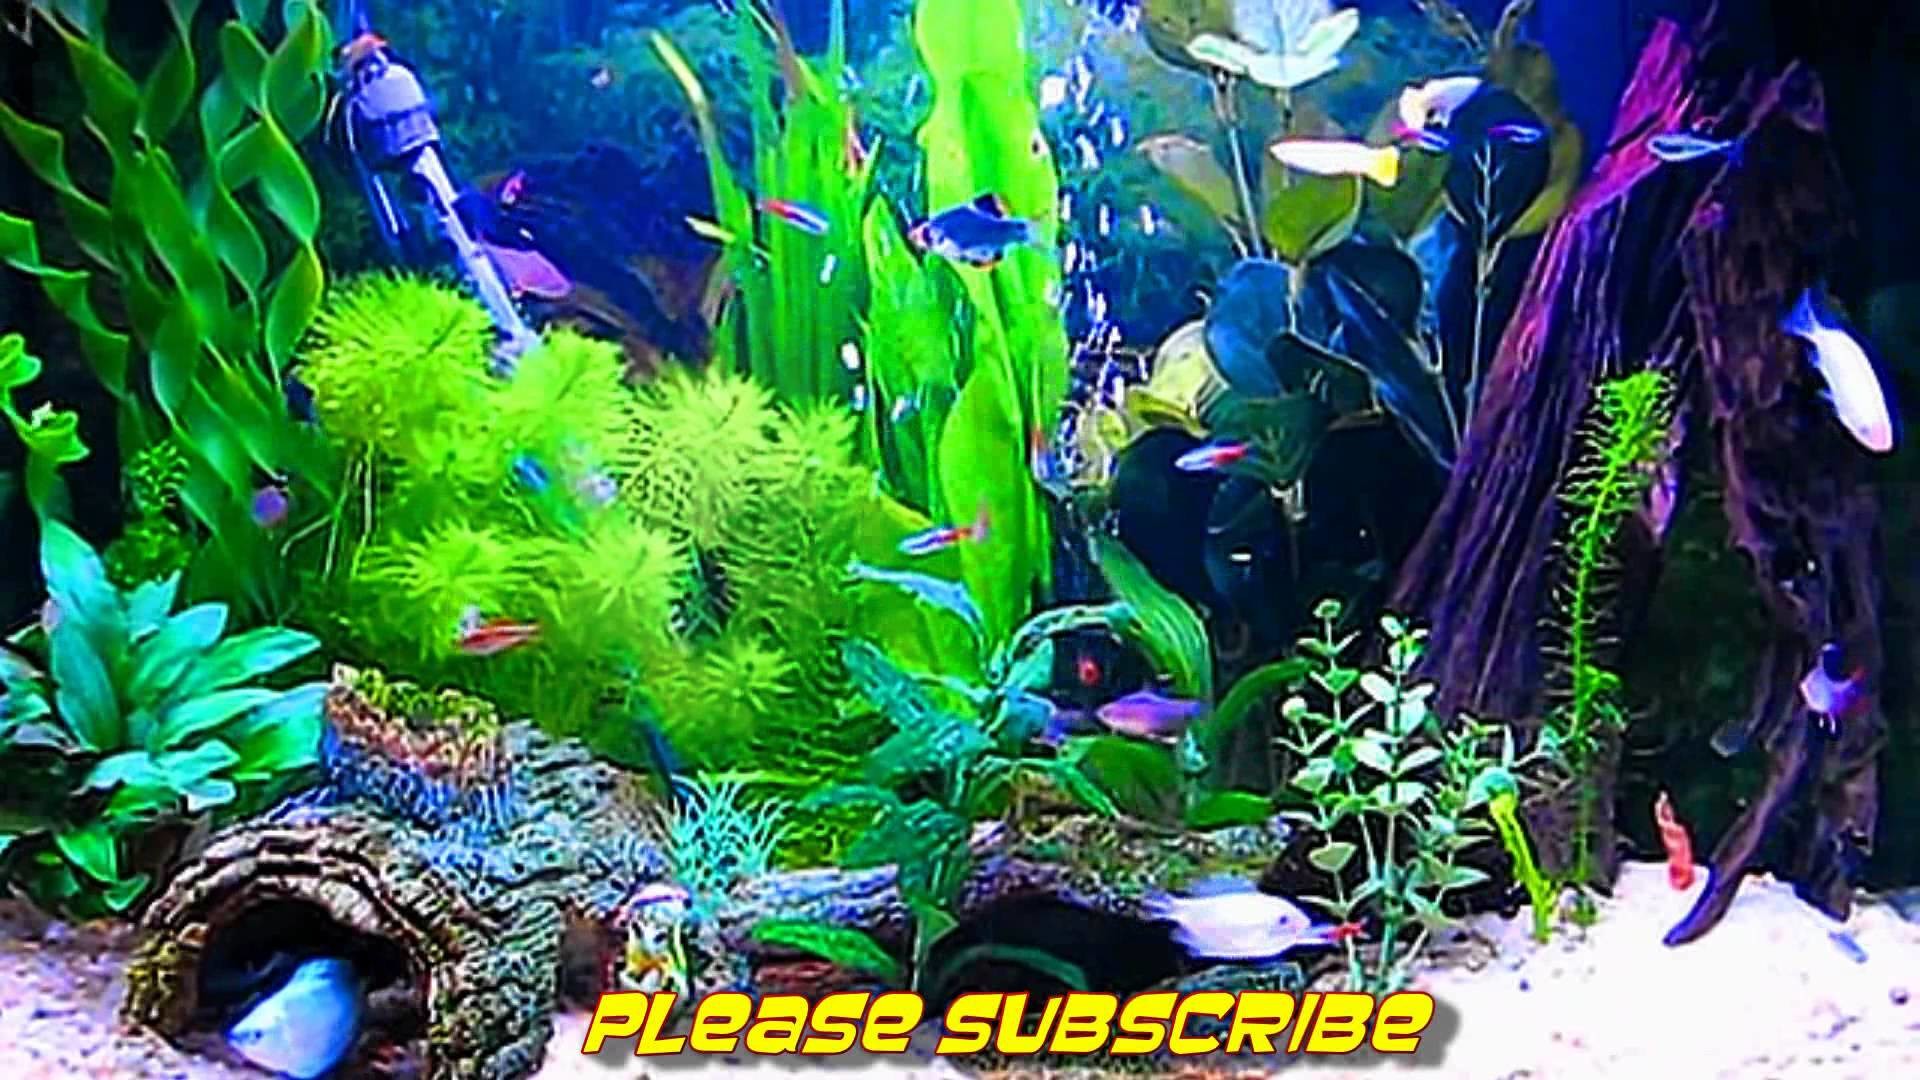 Download Live Aquarium Wallpaper For Mobile Gallery | Free Wallpapers |  Pinterest | Wallpaper and Wallpaper gallery